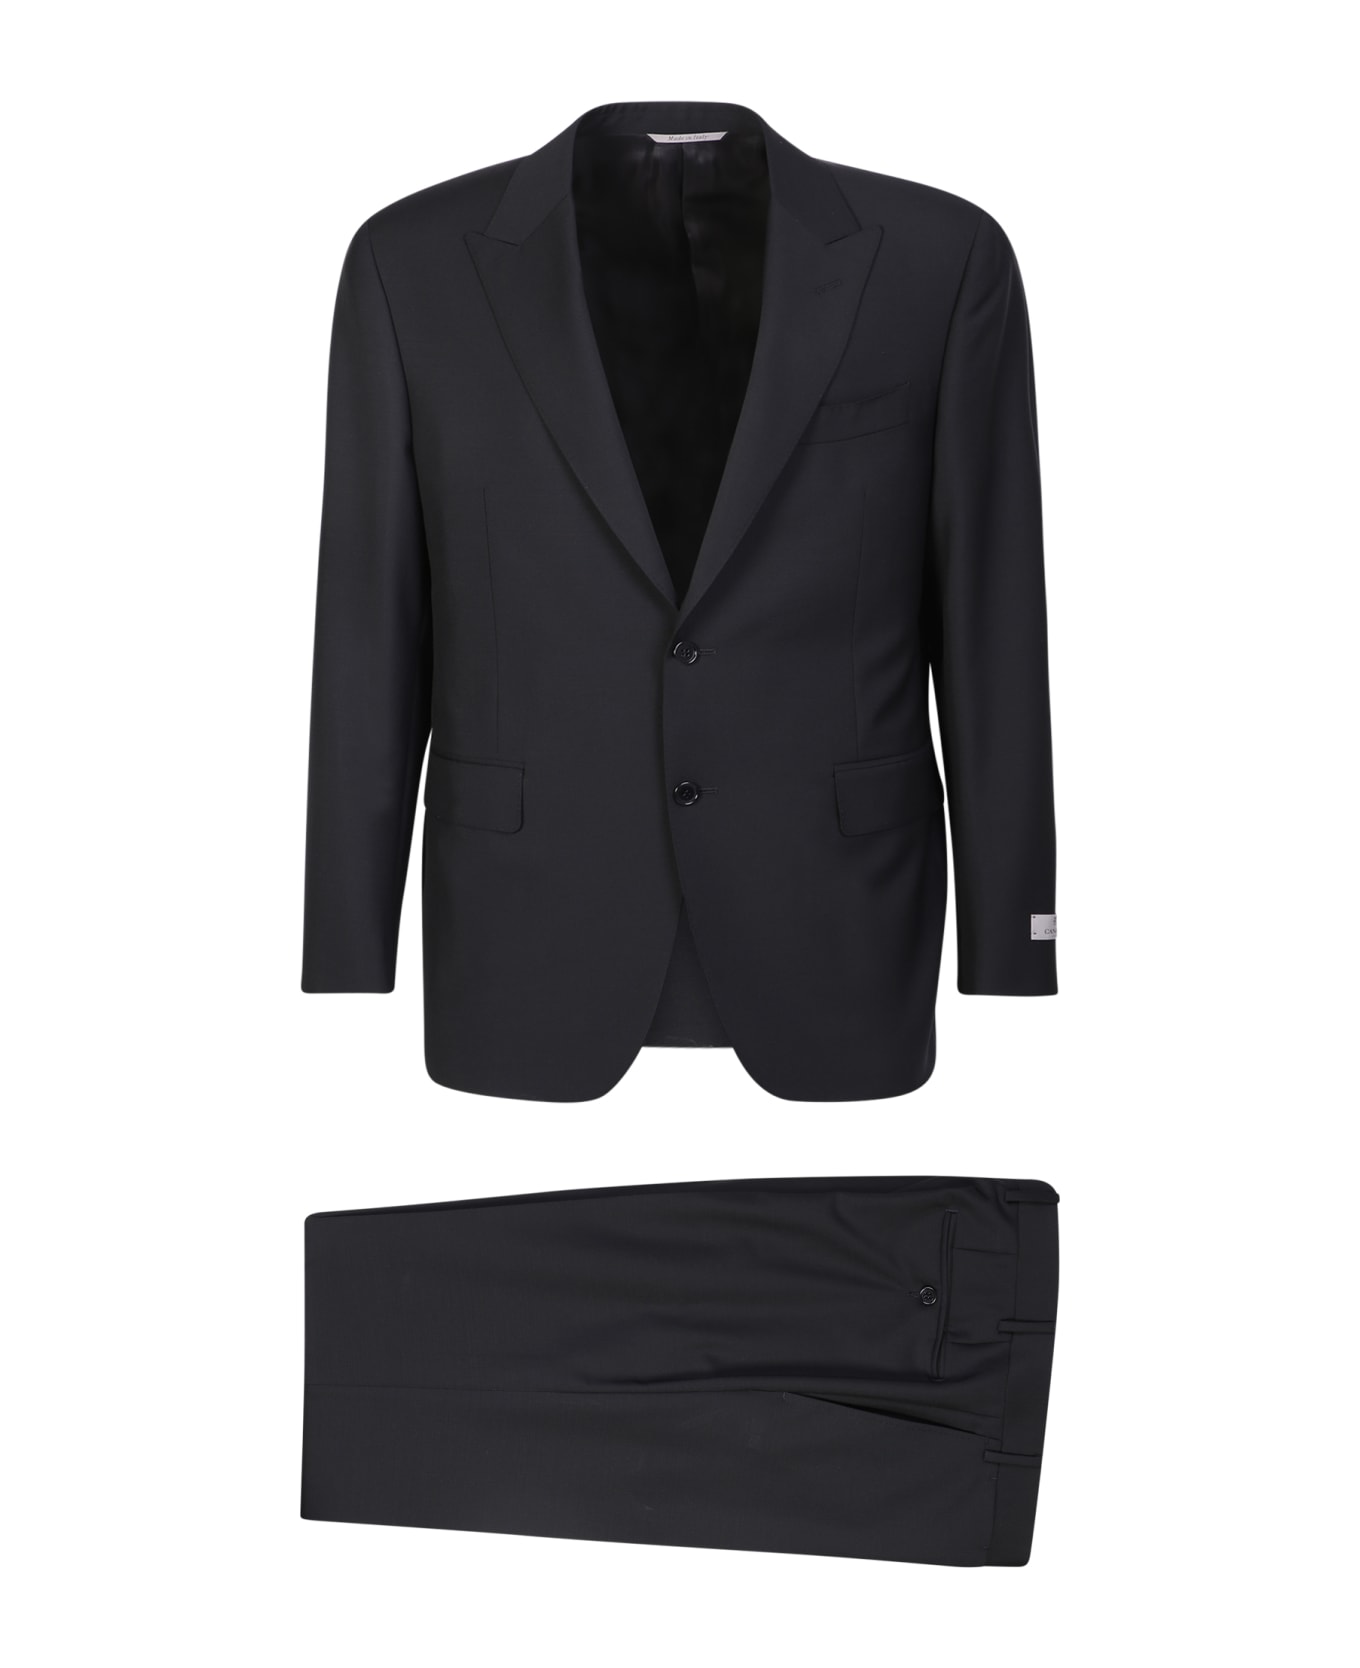 Canali Black Single-breasted Suit - Black